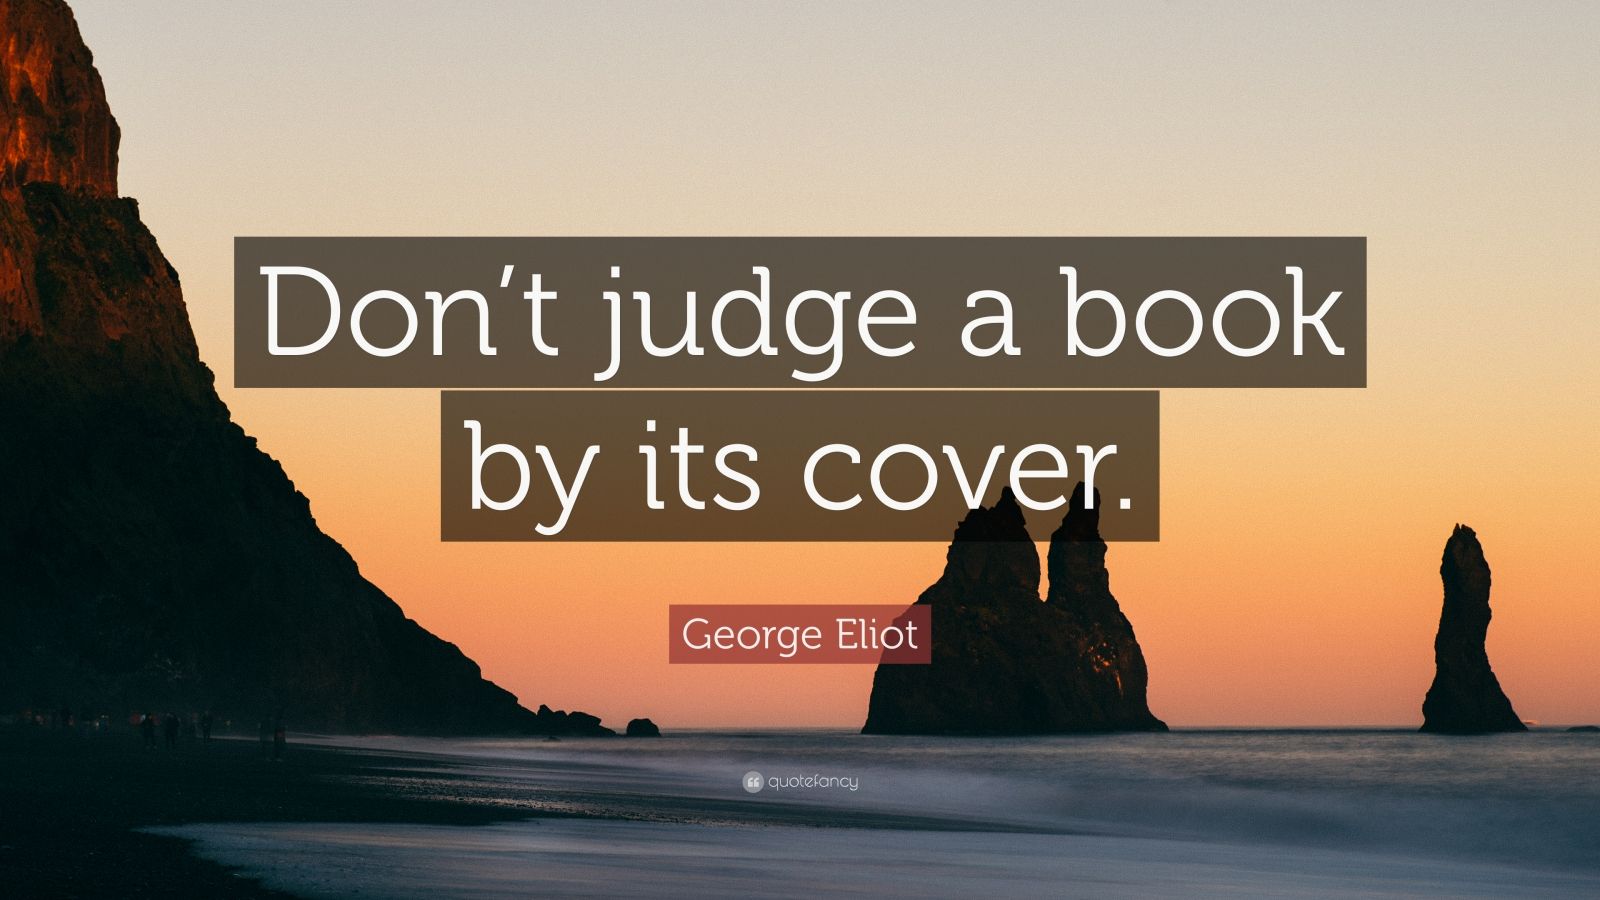 an essay on don't judge a book by its cover